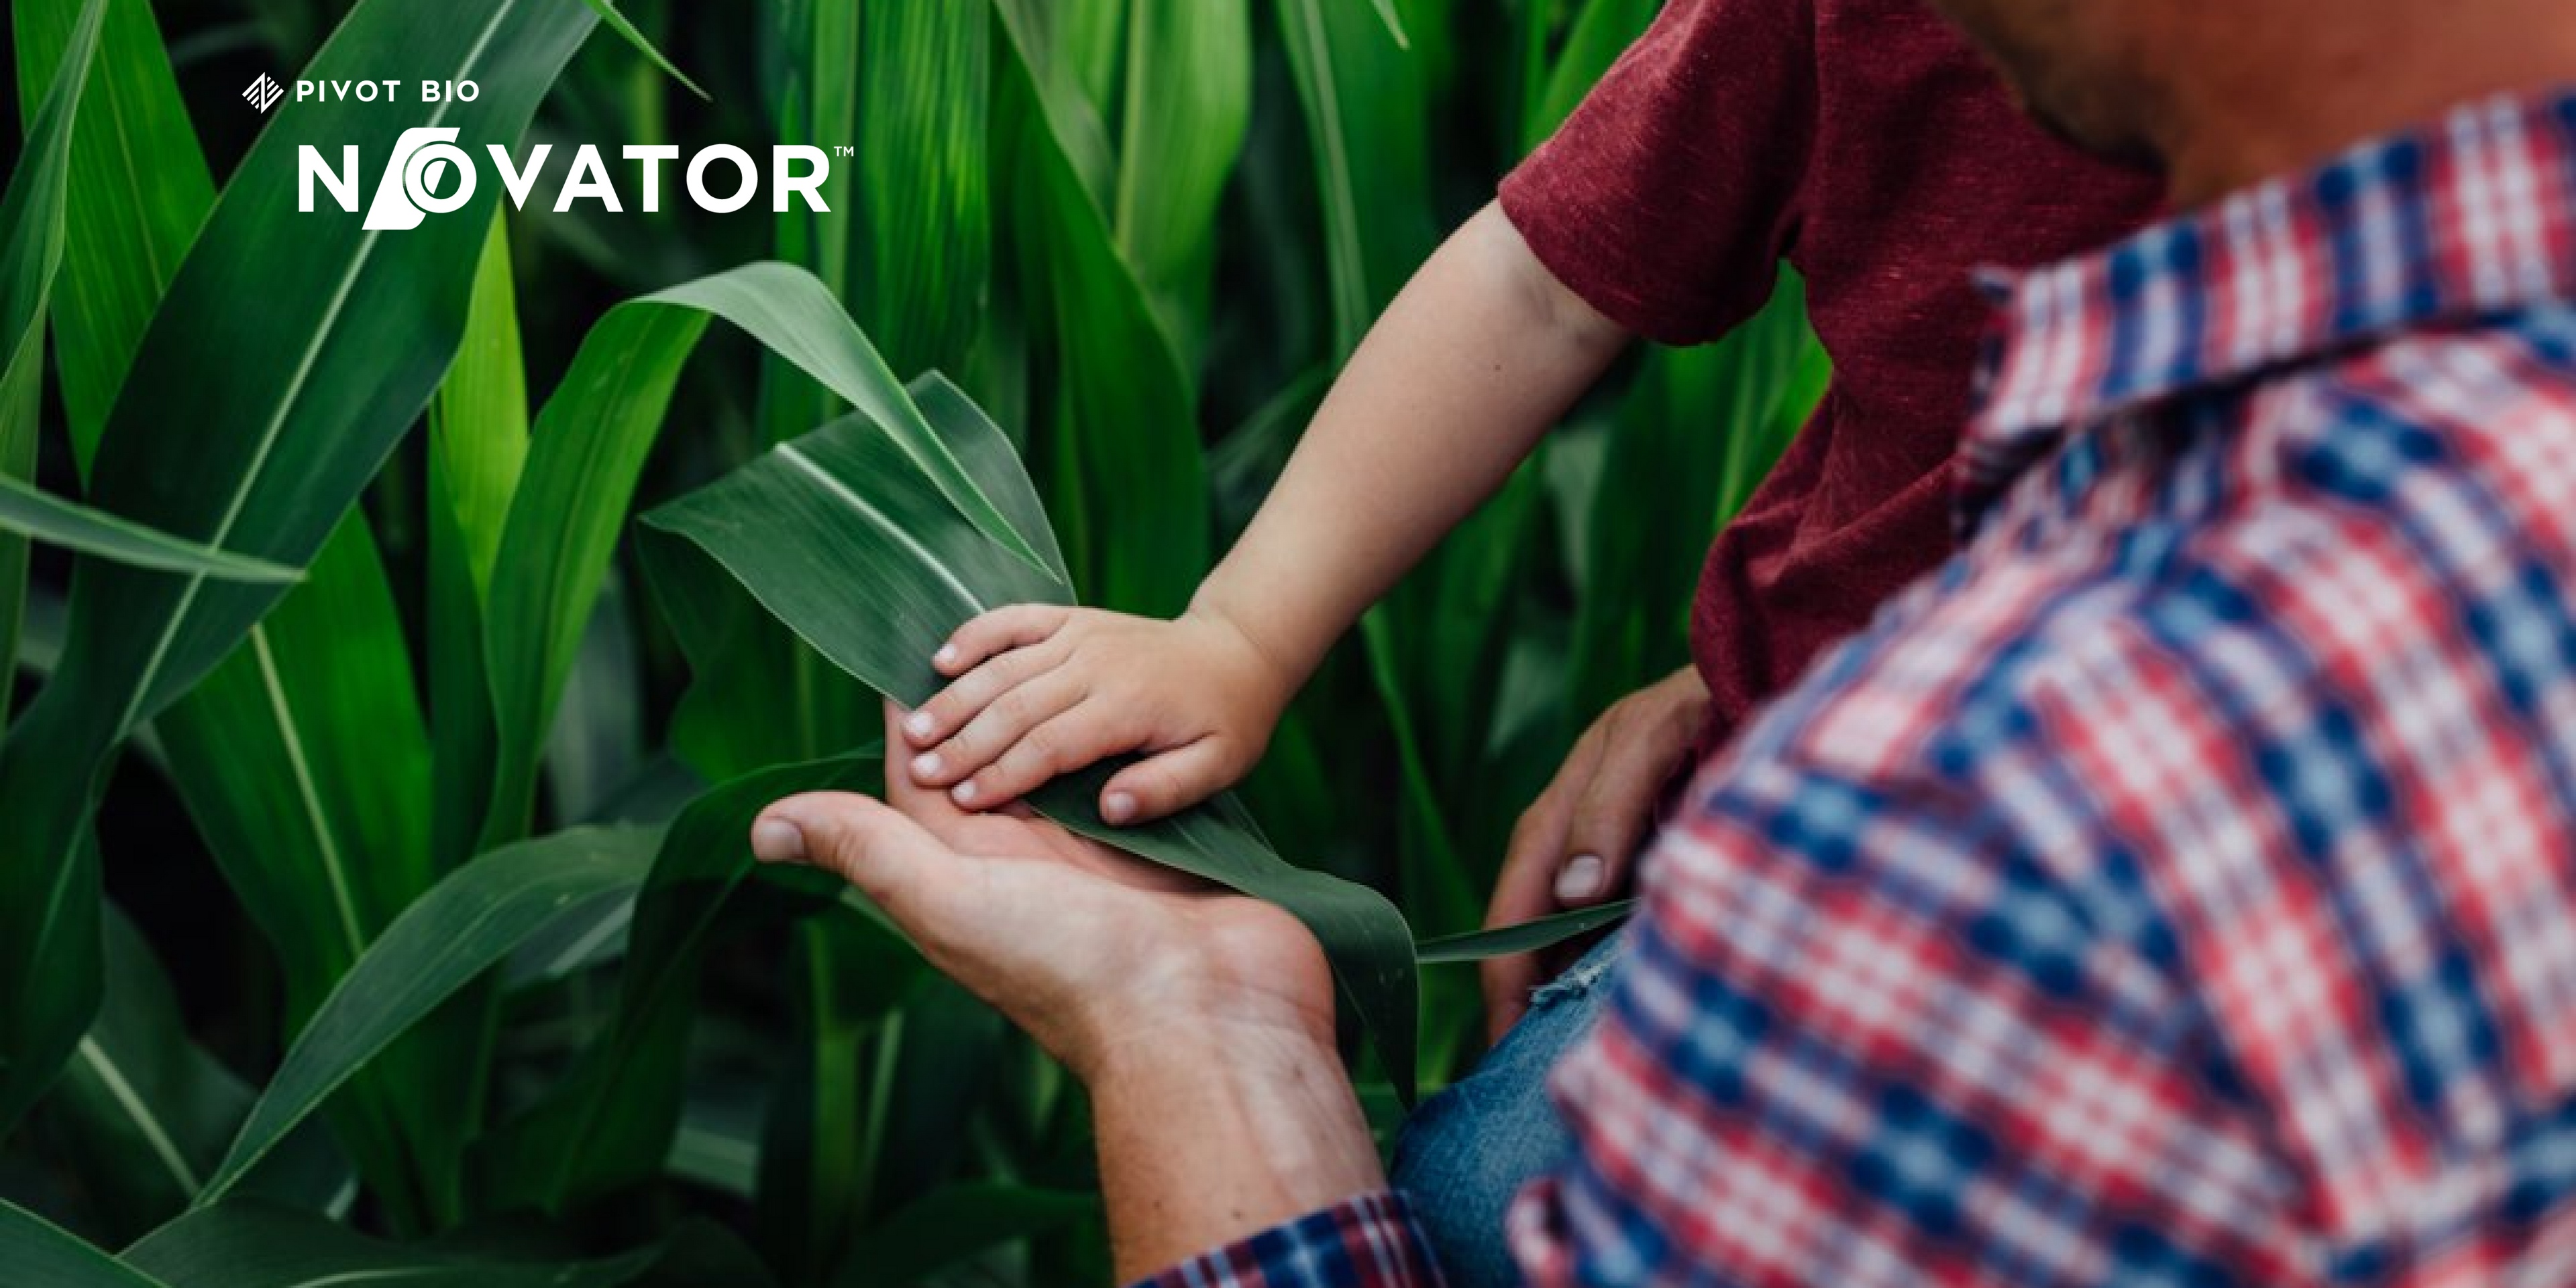 Dad and son touching a corn plant leaf